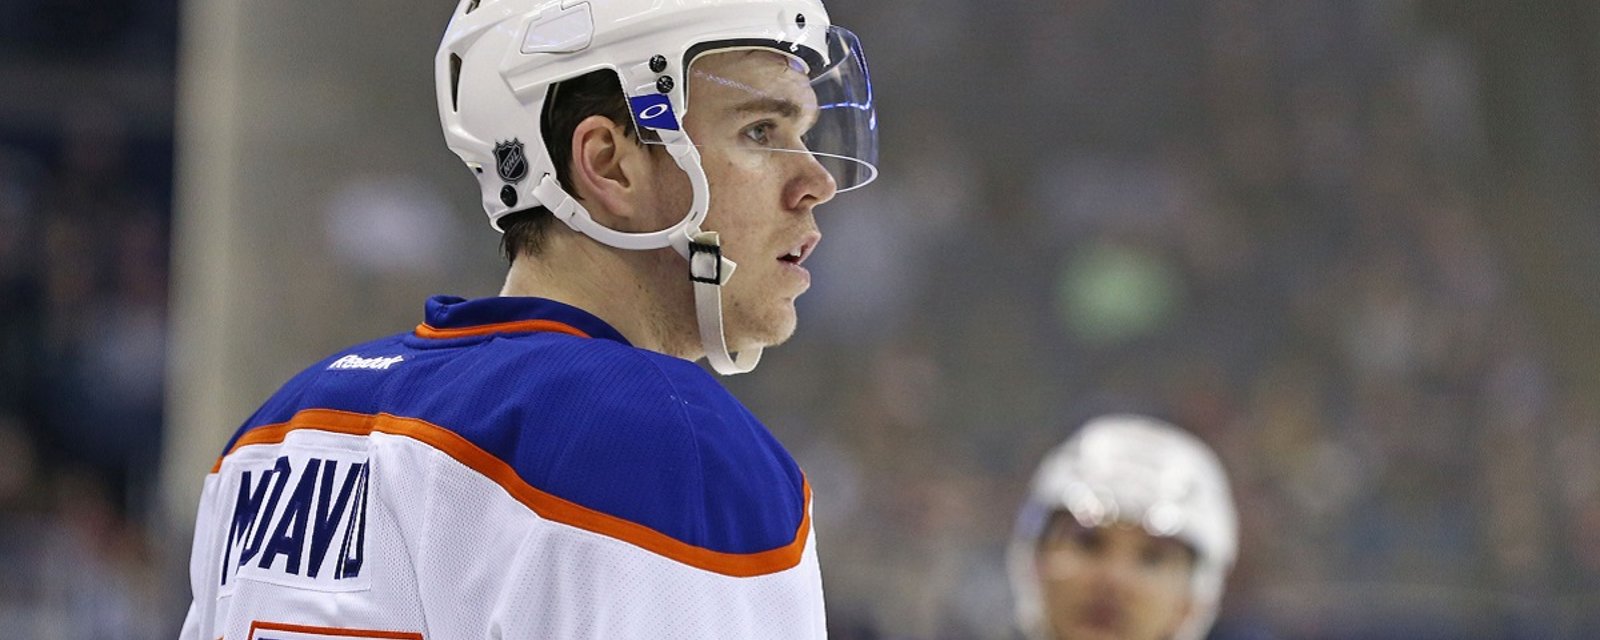 Despite winning MVP honors, McDavid says he's not the best in the NHL.